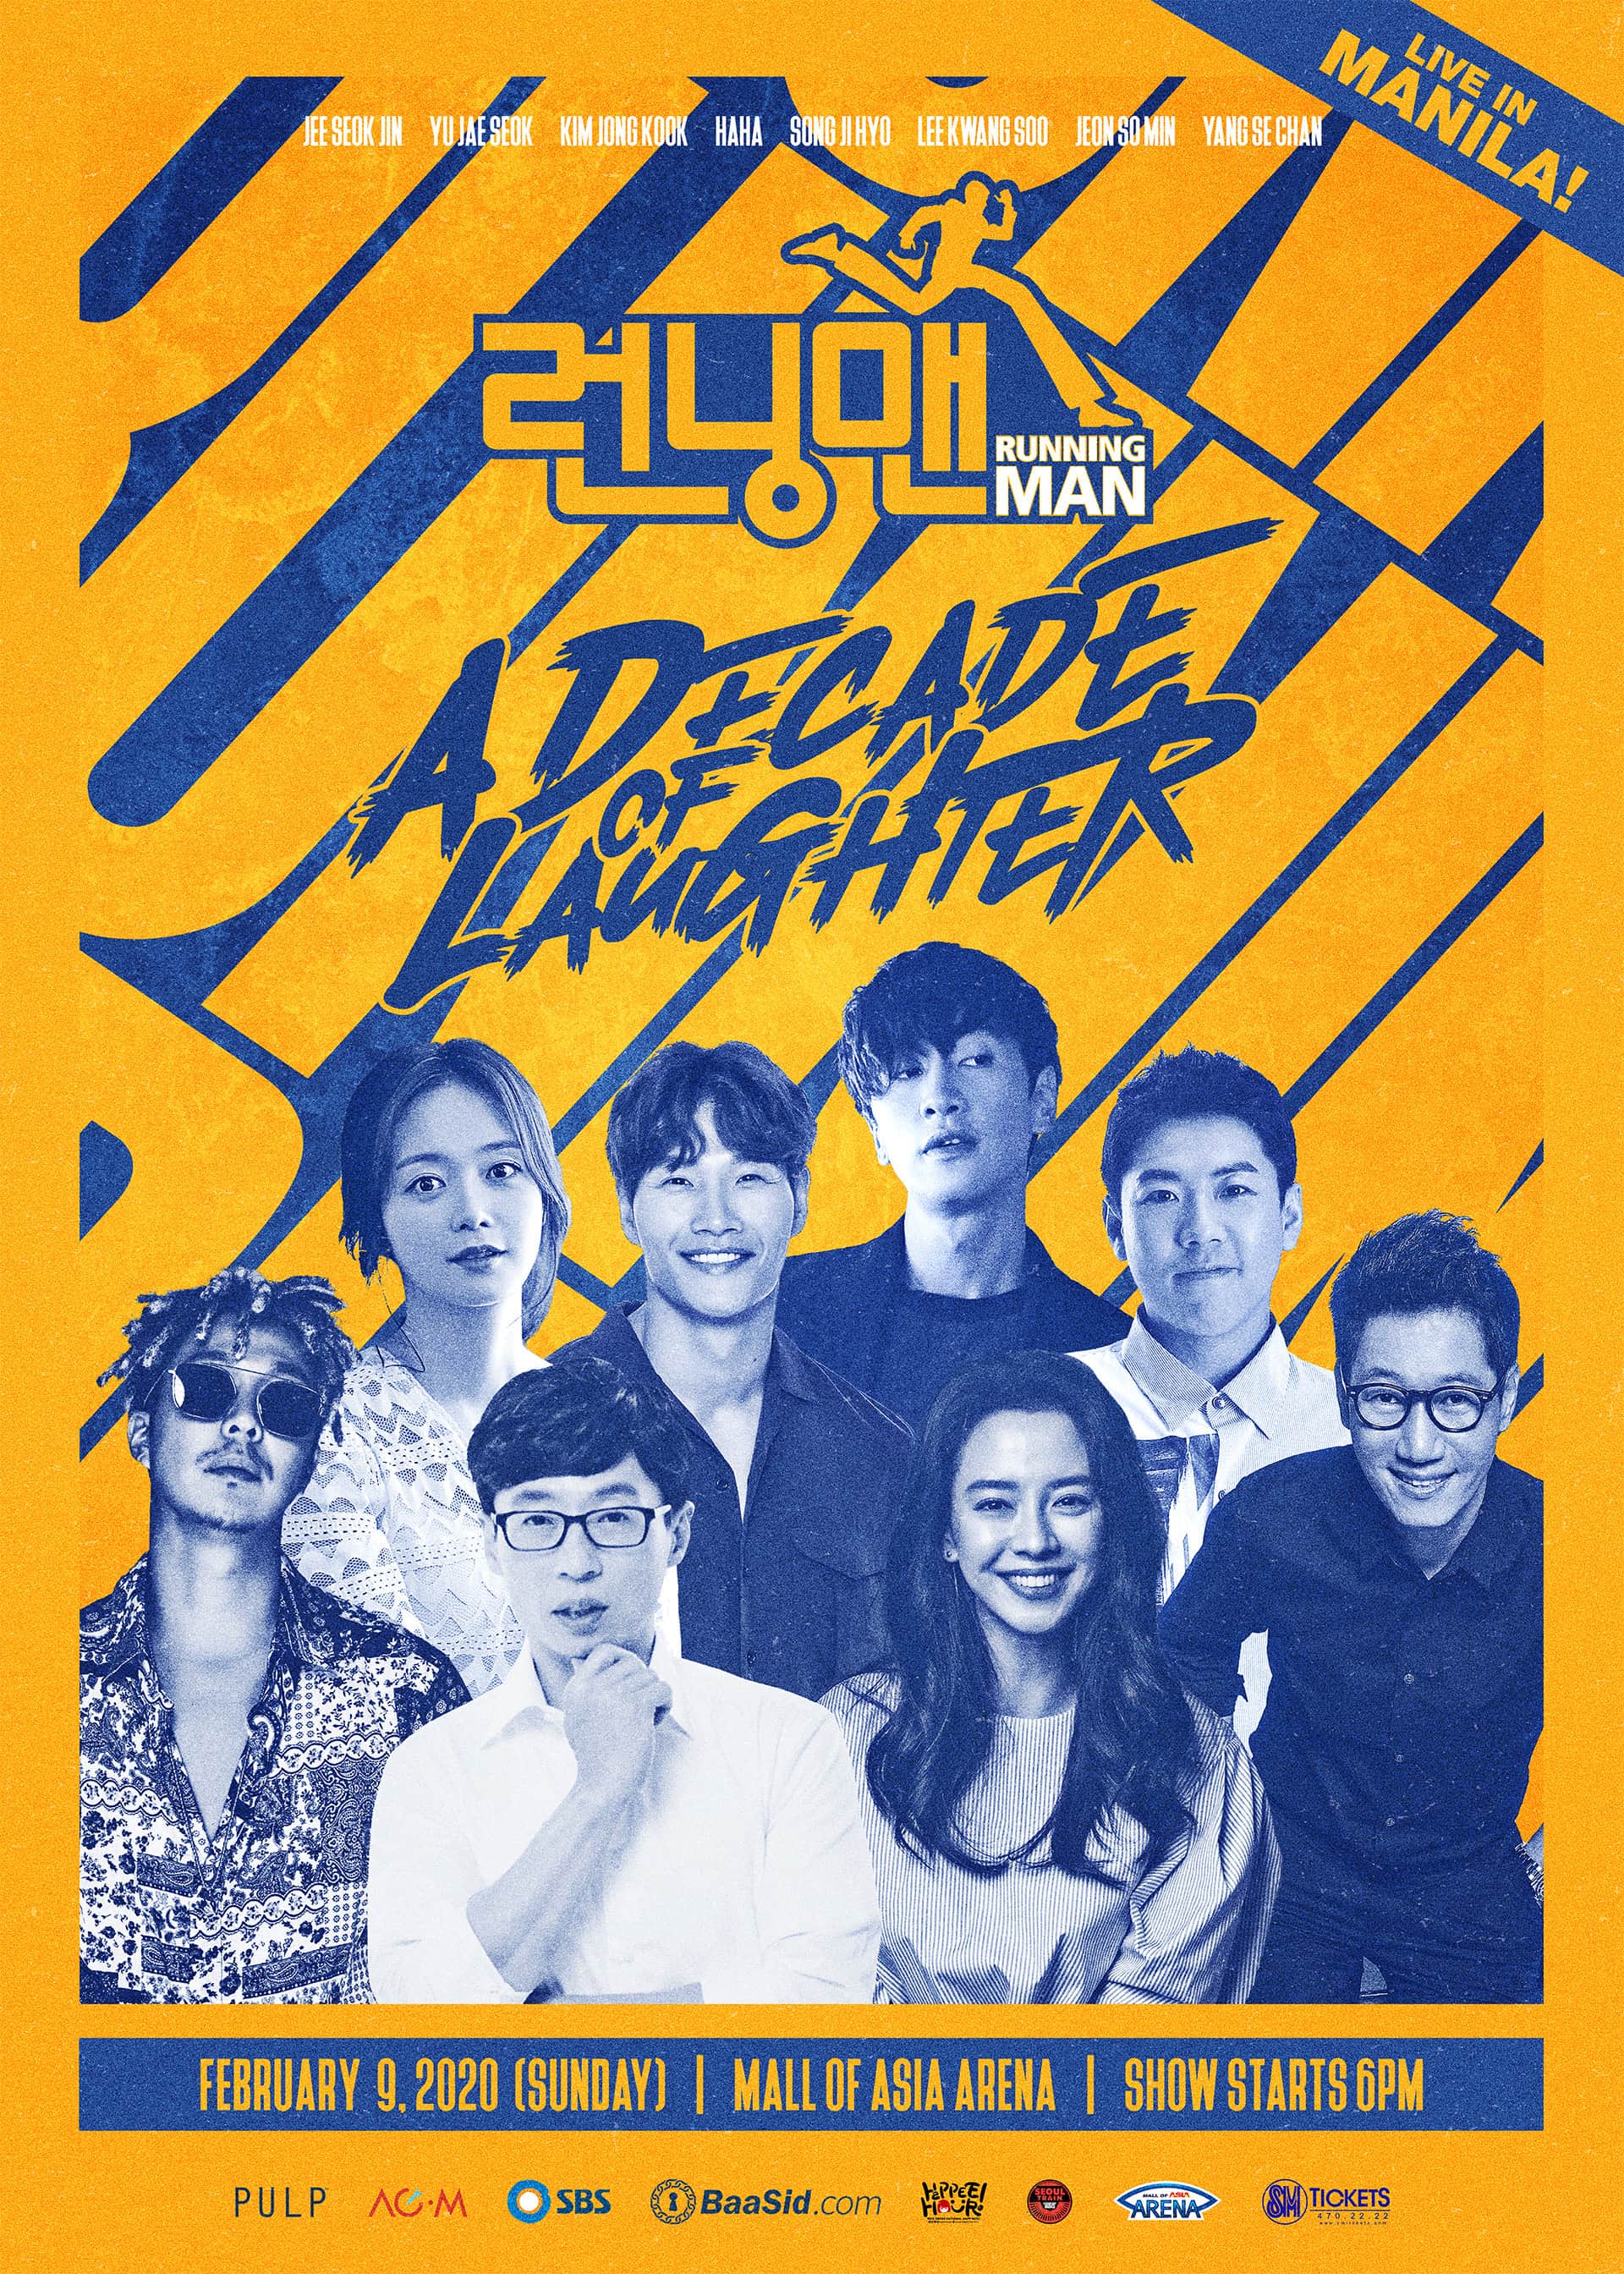 South Korea’s Running Man Brings ‘A Decade of Laughter’ Tour in Manila